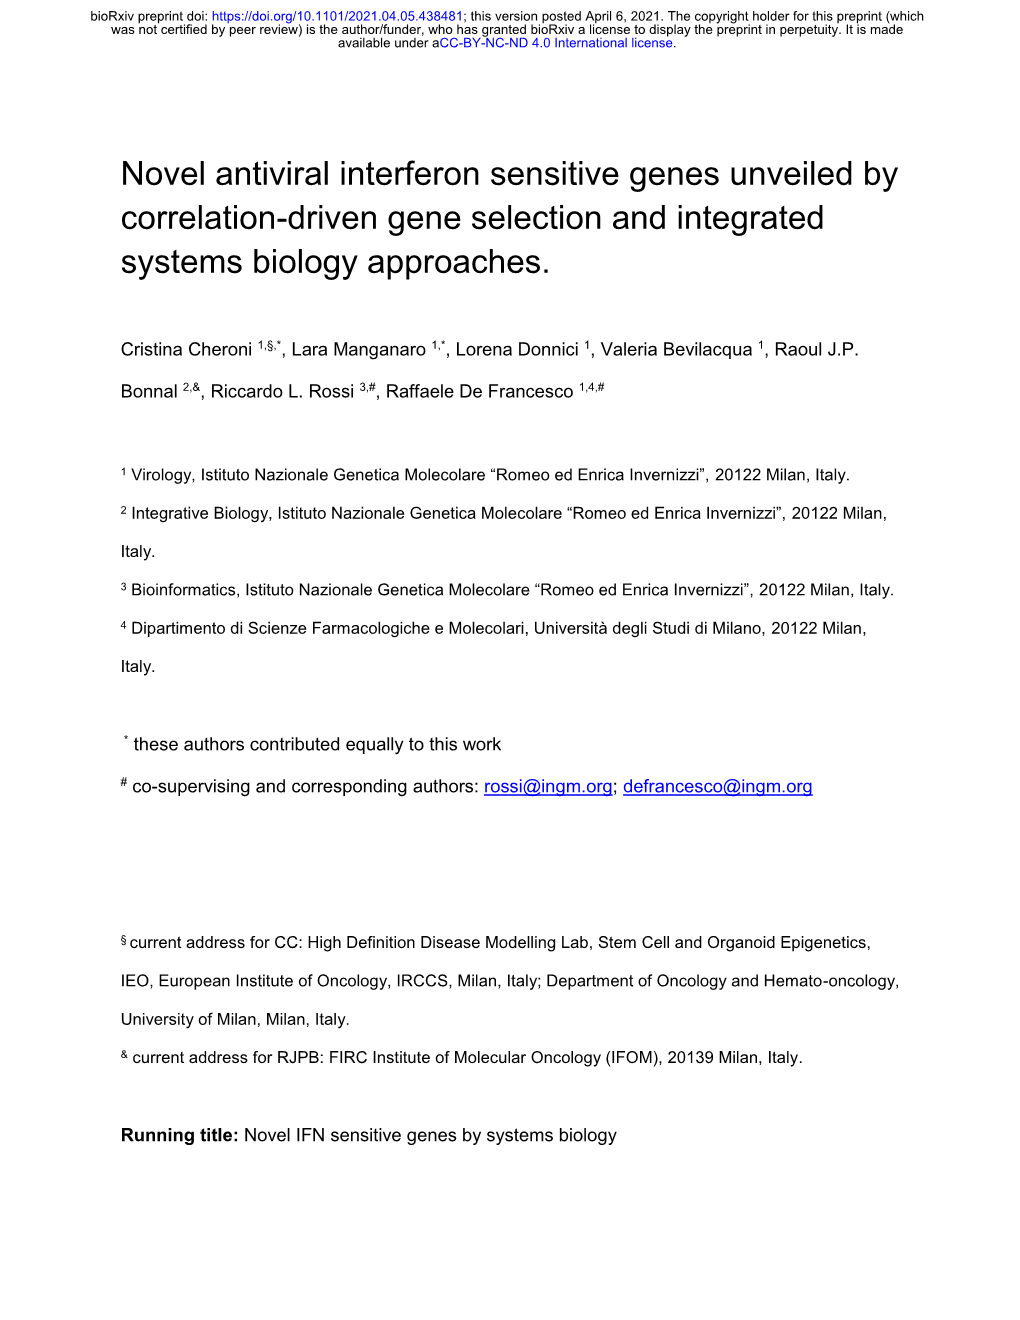 Novel Antiviral Interferon Sensitive Genes Unveiled by Correlation-Driven Gene Selection and Integrated Systems Biology Approaches